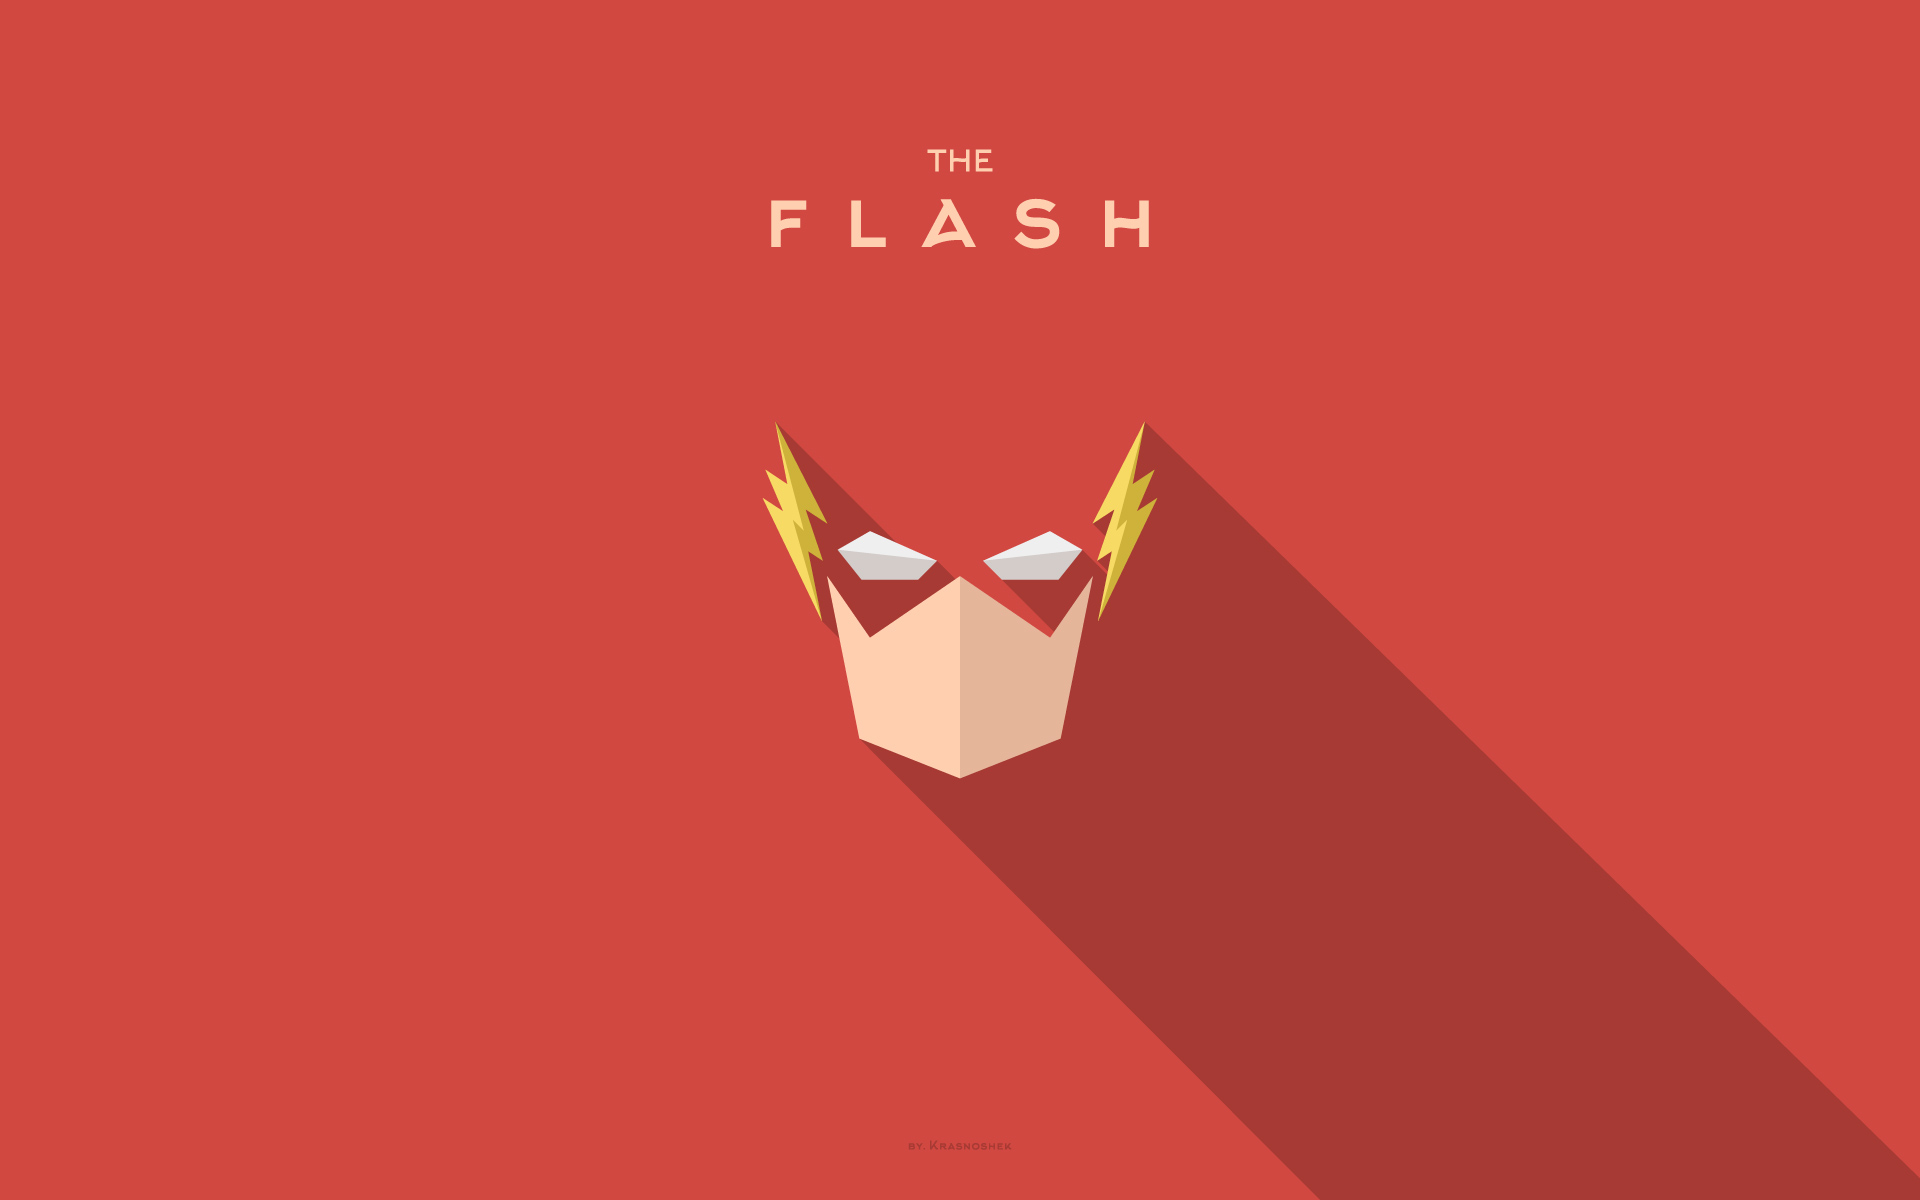 Awesome Flash Wallpaper Link To More Sizes In Ments I